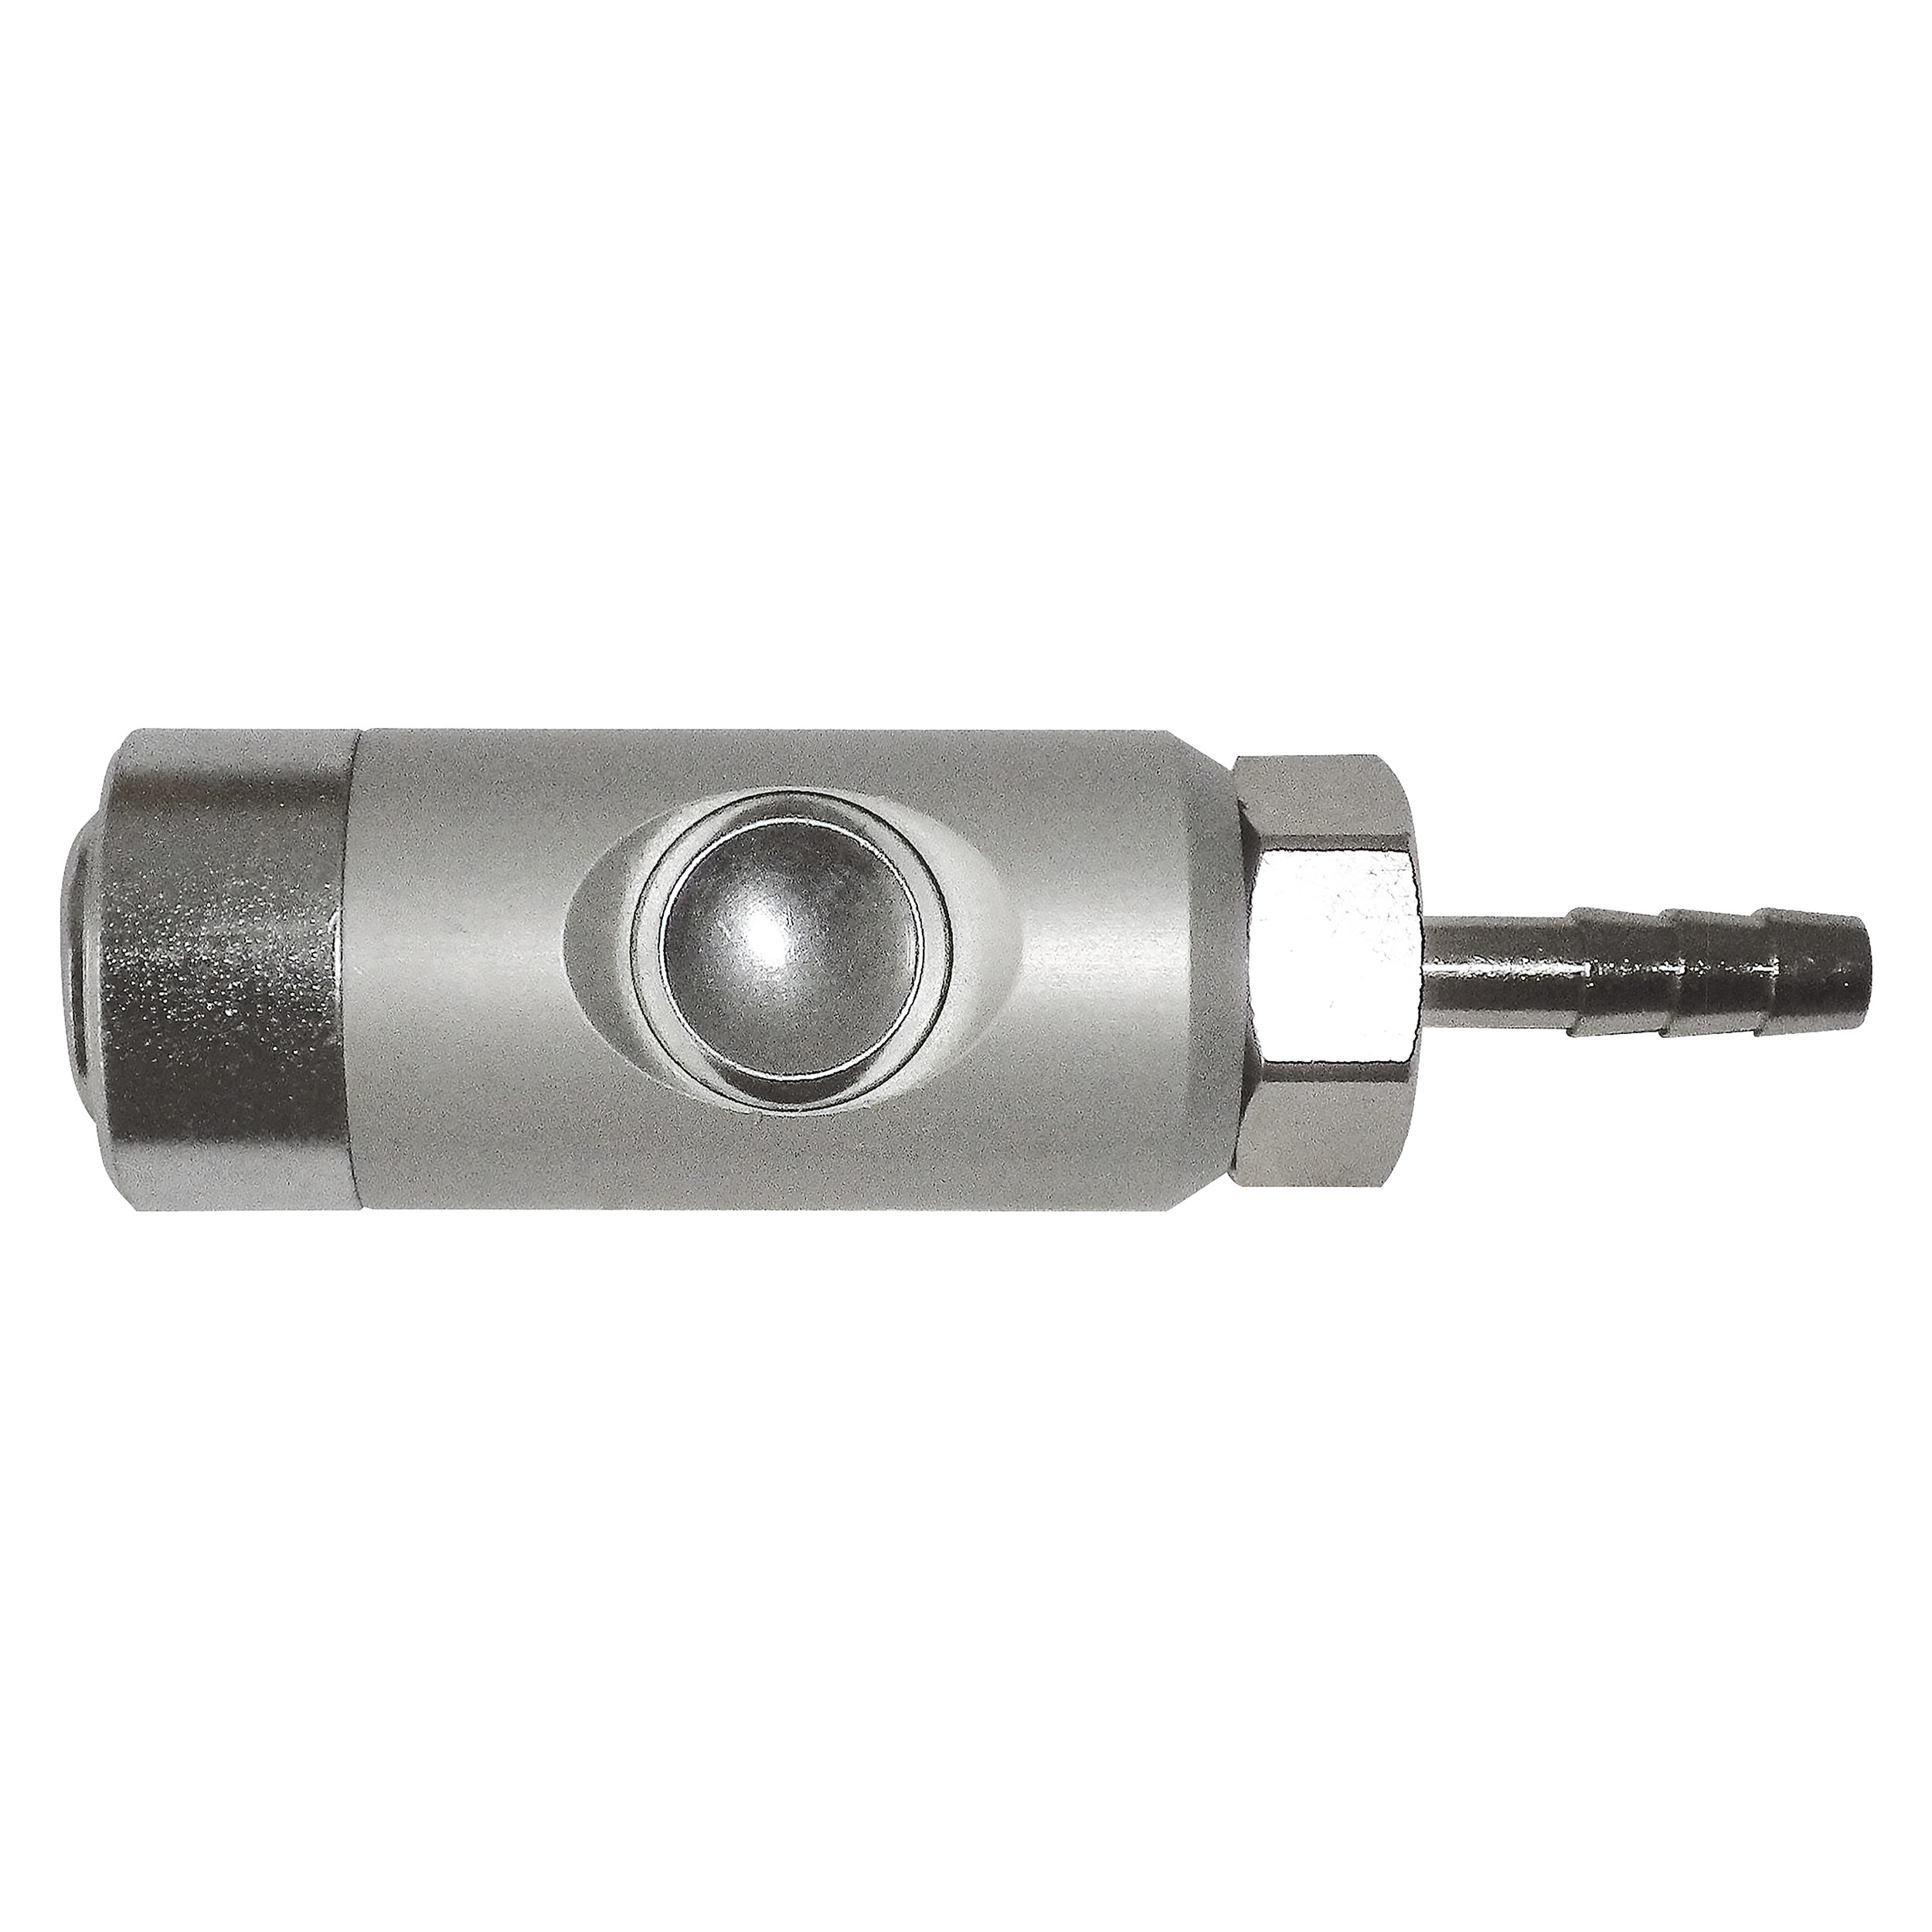 DN 5.5 safety coupling w. ARO profile, w. push button, QN: 1,000 Nl/min, MOP: 145 psi, hose nozzle DN 6, length: 88.5 mm, AF 21